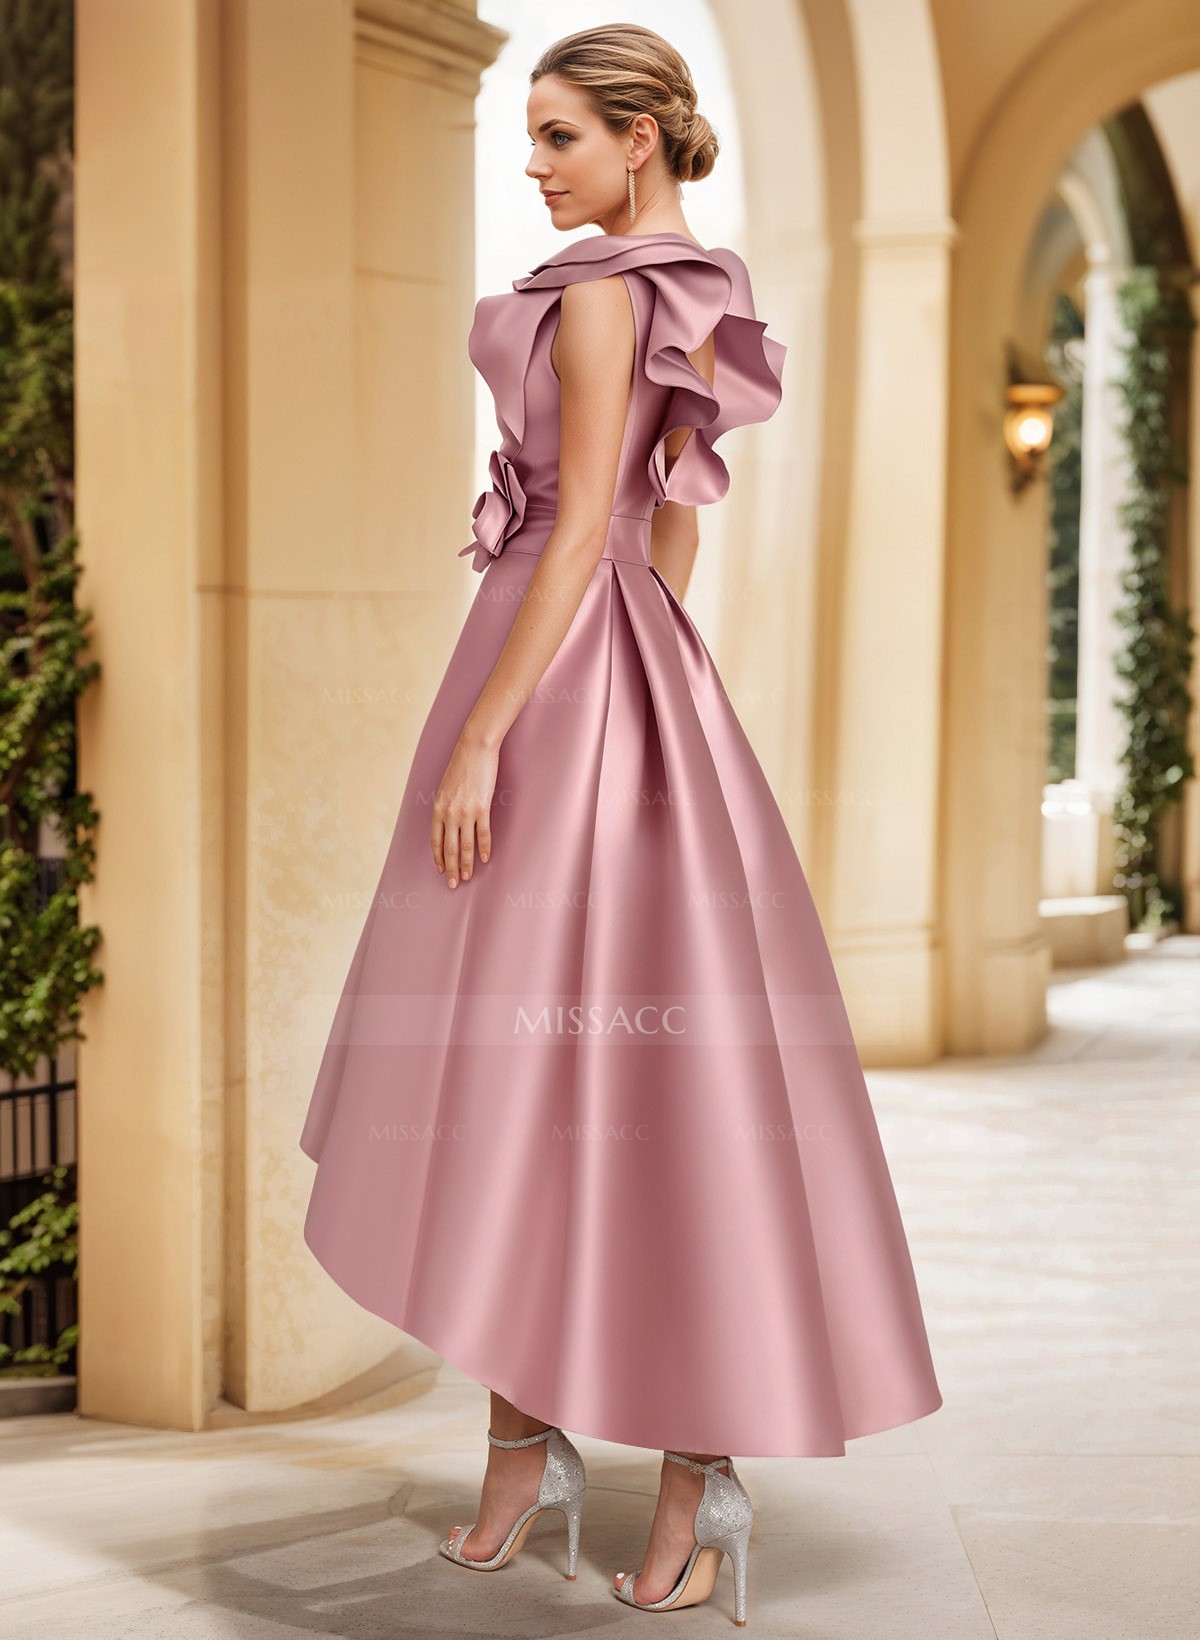 A-Line V-Neck Sleeveless Satin Mother Of The Bride Dresses With Flower(s)